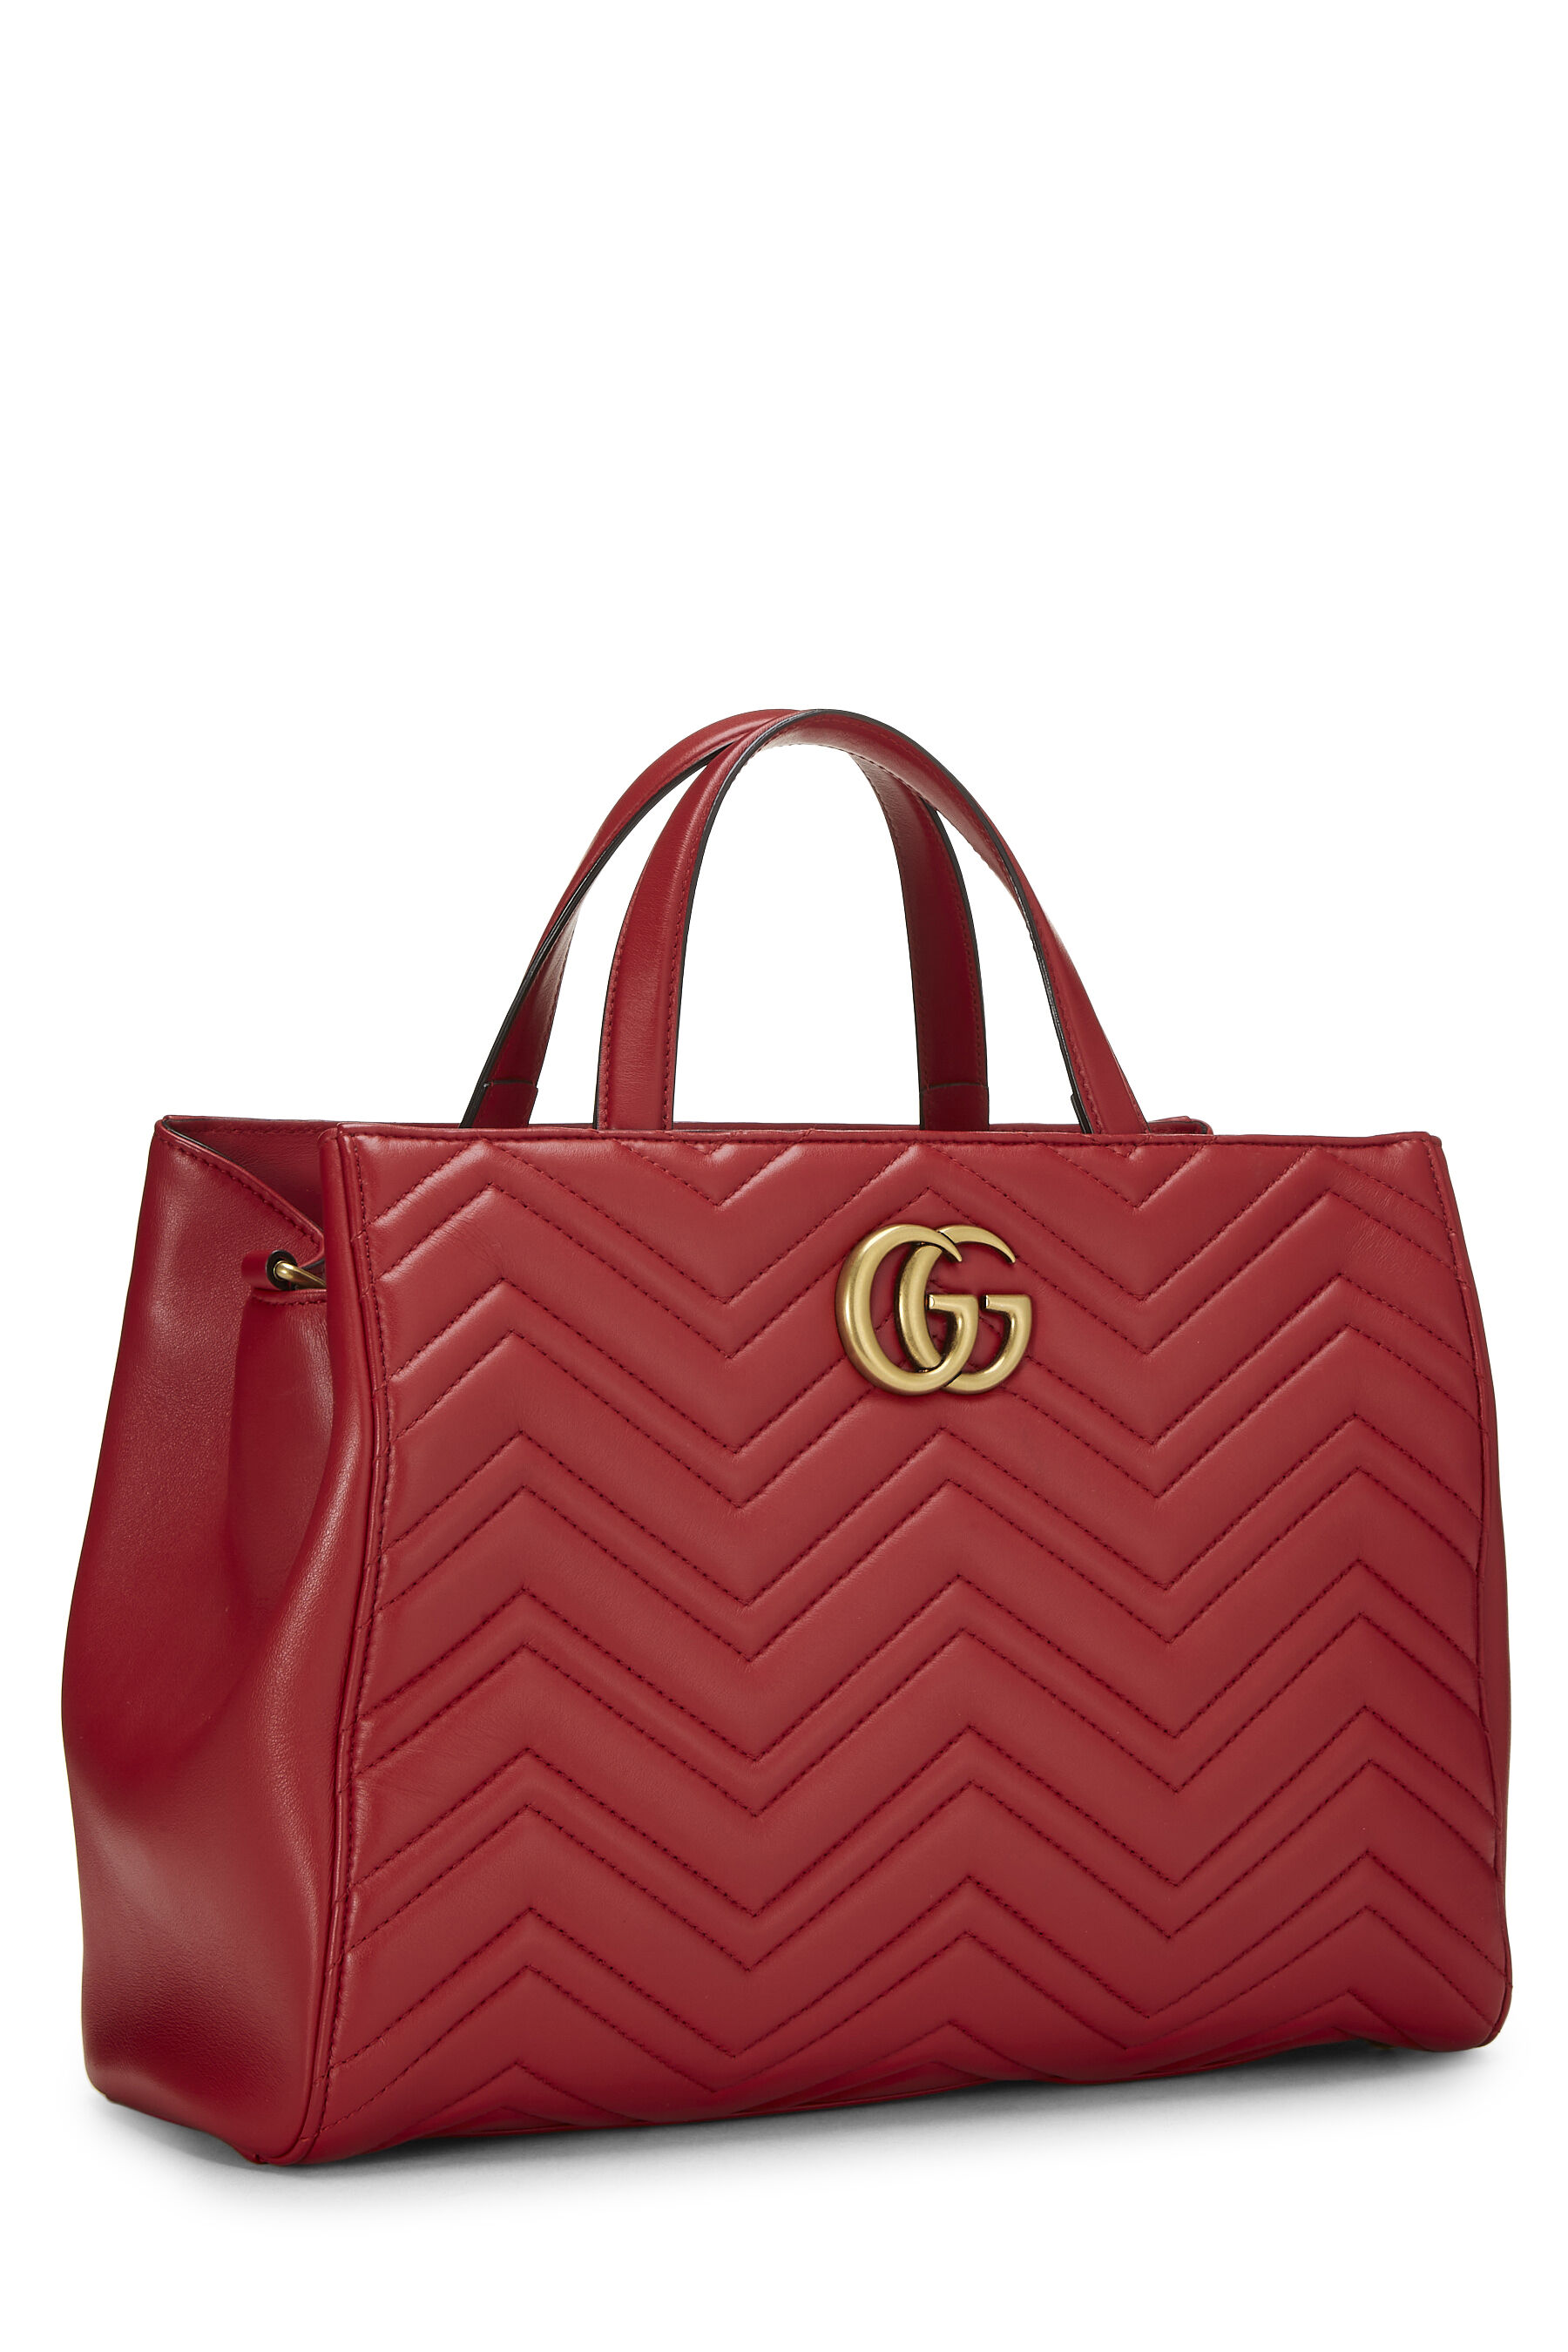 Red Leather GG Marmont Top Handle Bag Medium